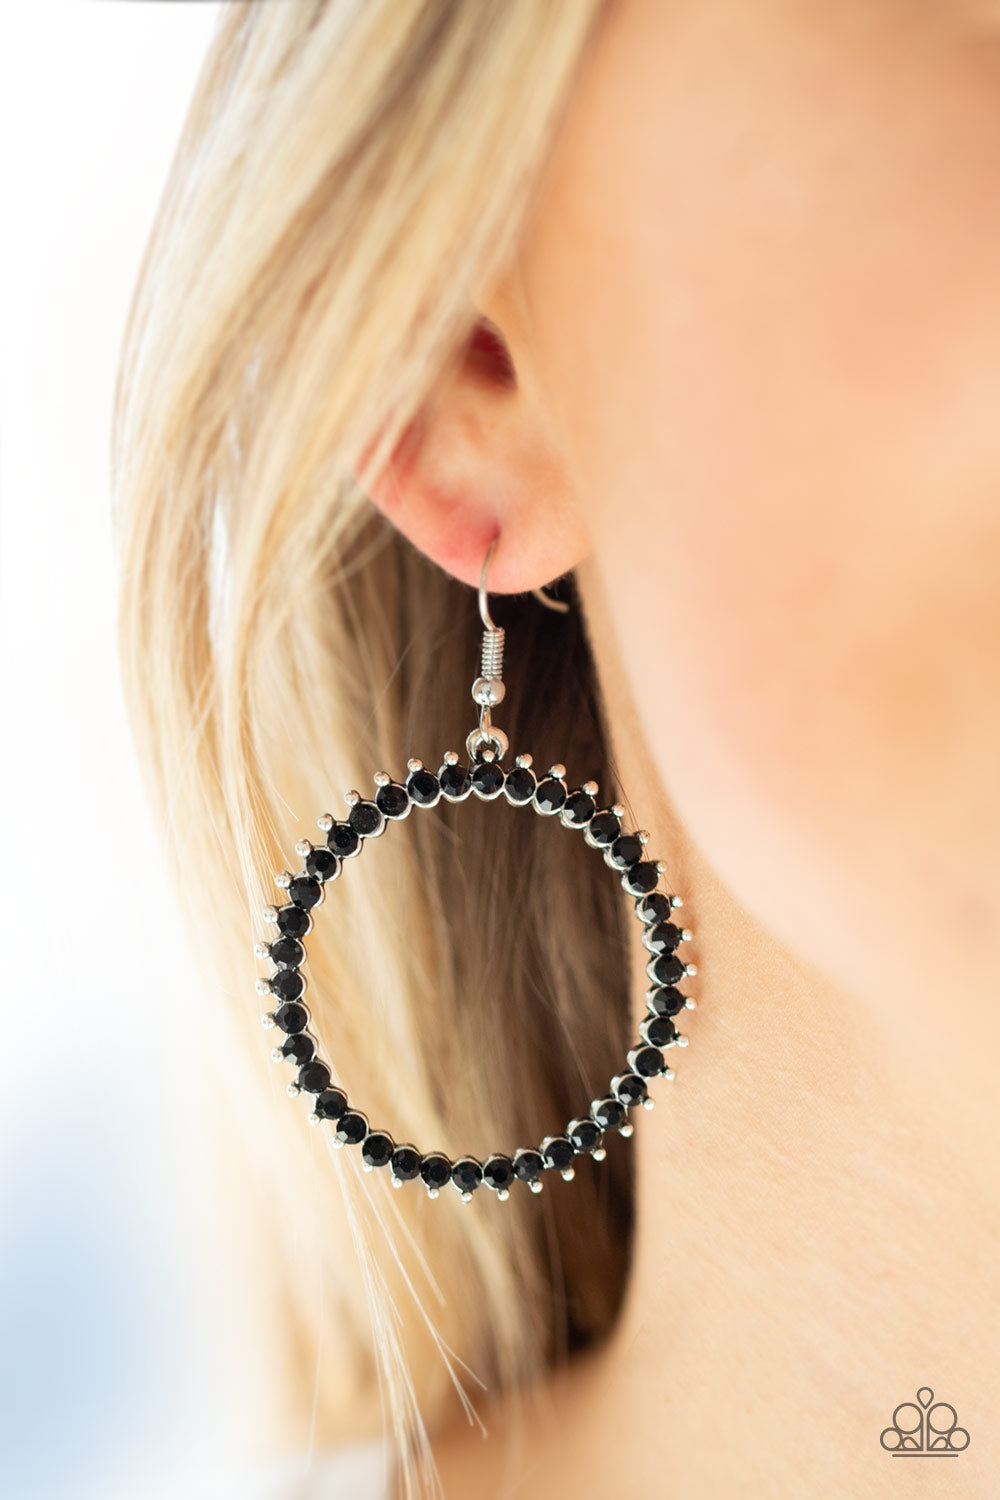 Paparazzi Spark Their Attention - Black Rhinestones - Earrings - $5 Jewelry With Ashley Swint